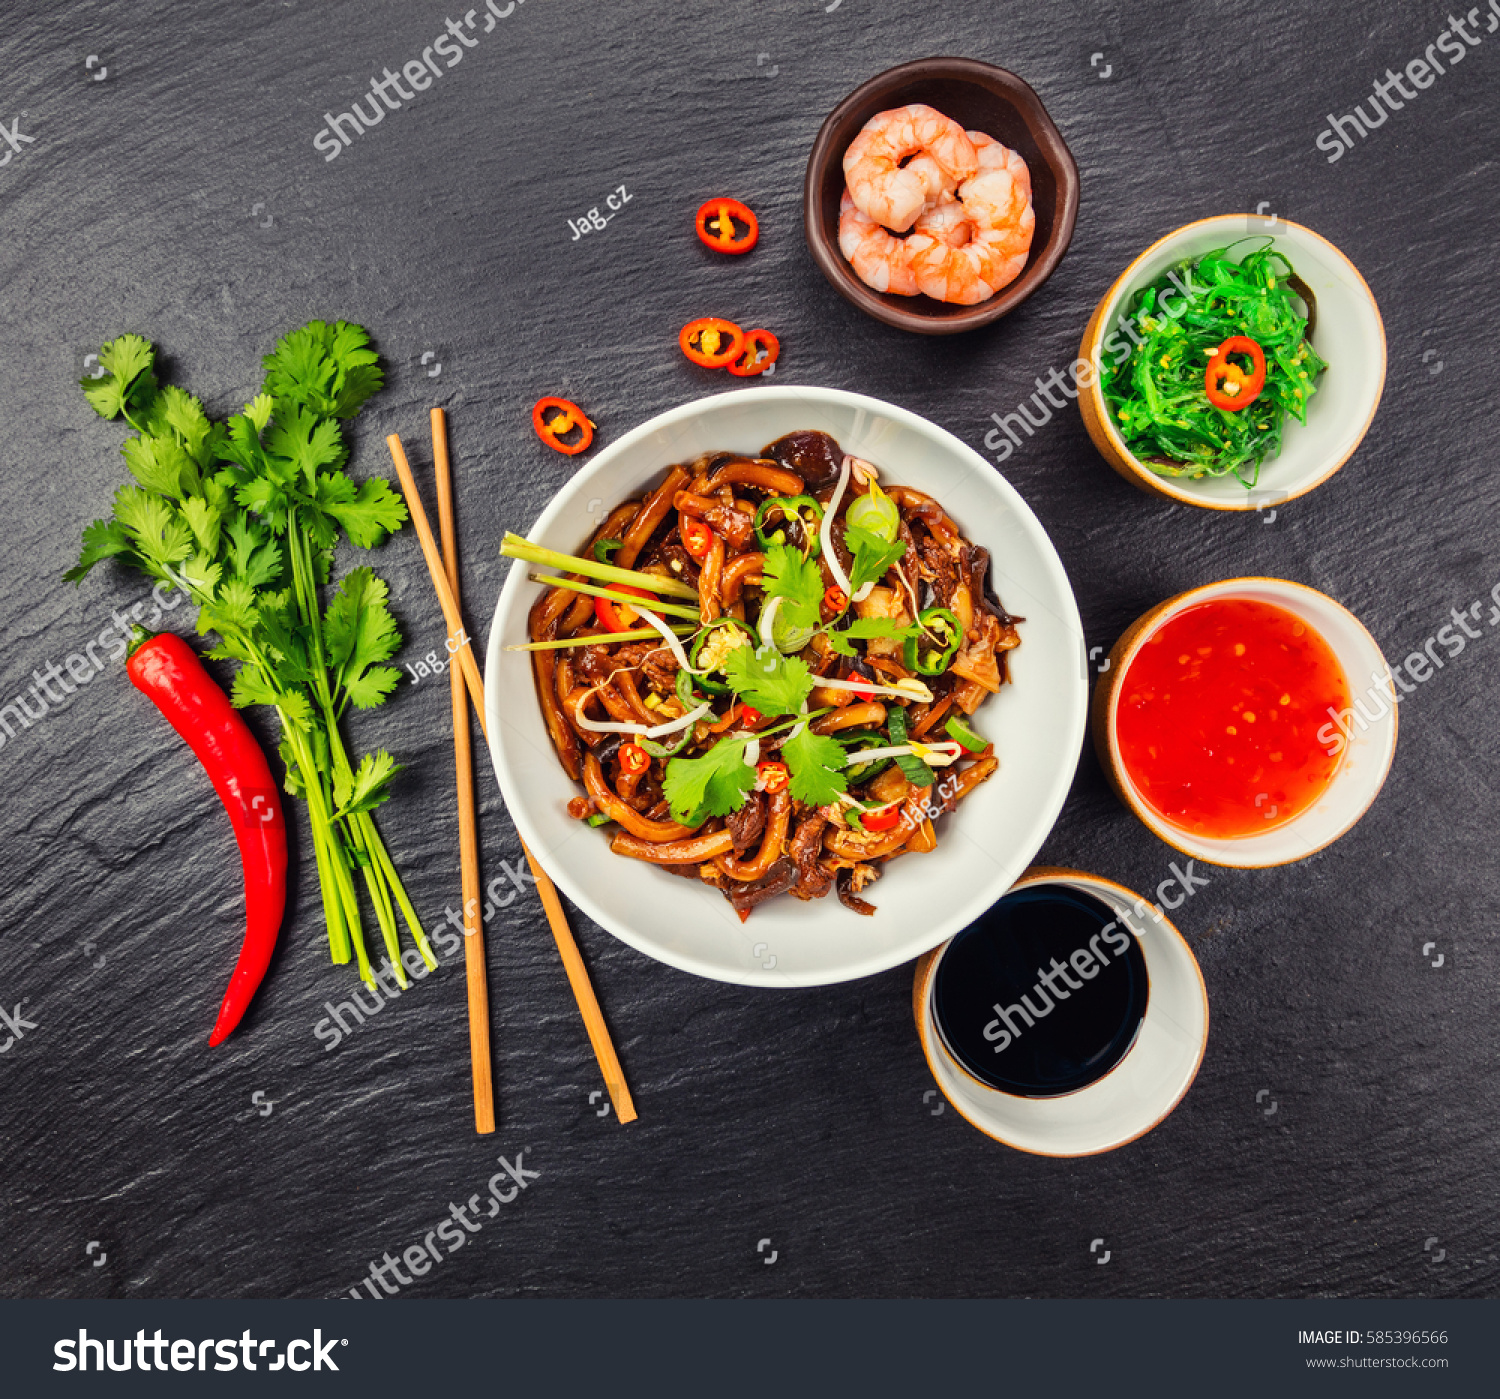 Asian noodles with spicy soy sauce and chicken pieces, top view, served on black stone. #585396566